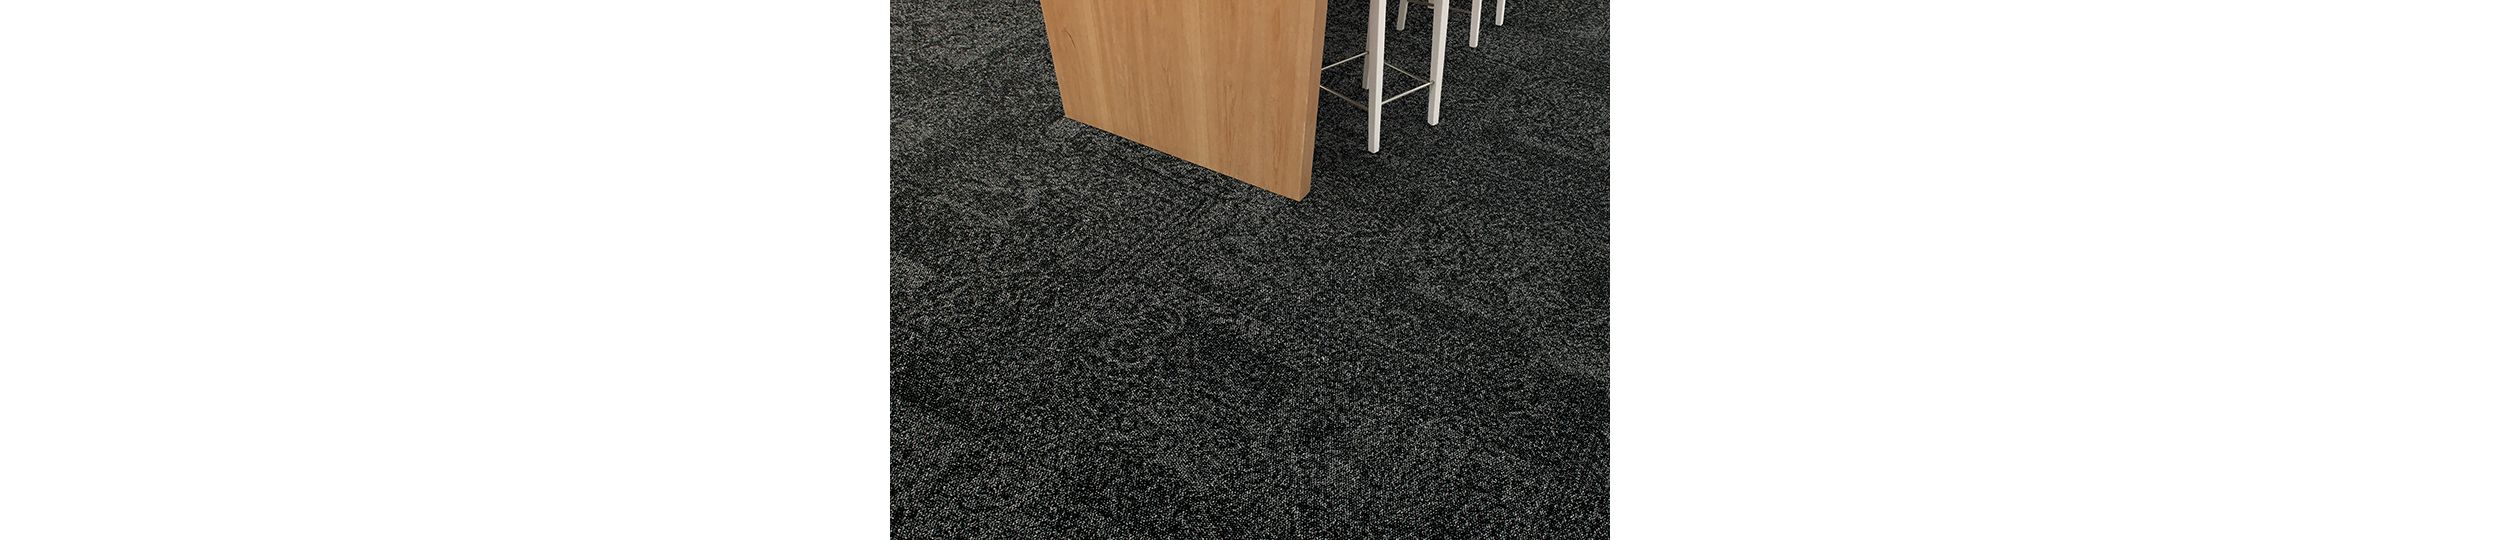 Interface Open Air 405 carpet tile in floor view with corner of wood table numéro d’image 4